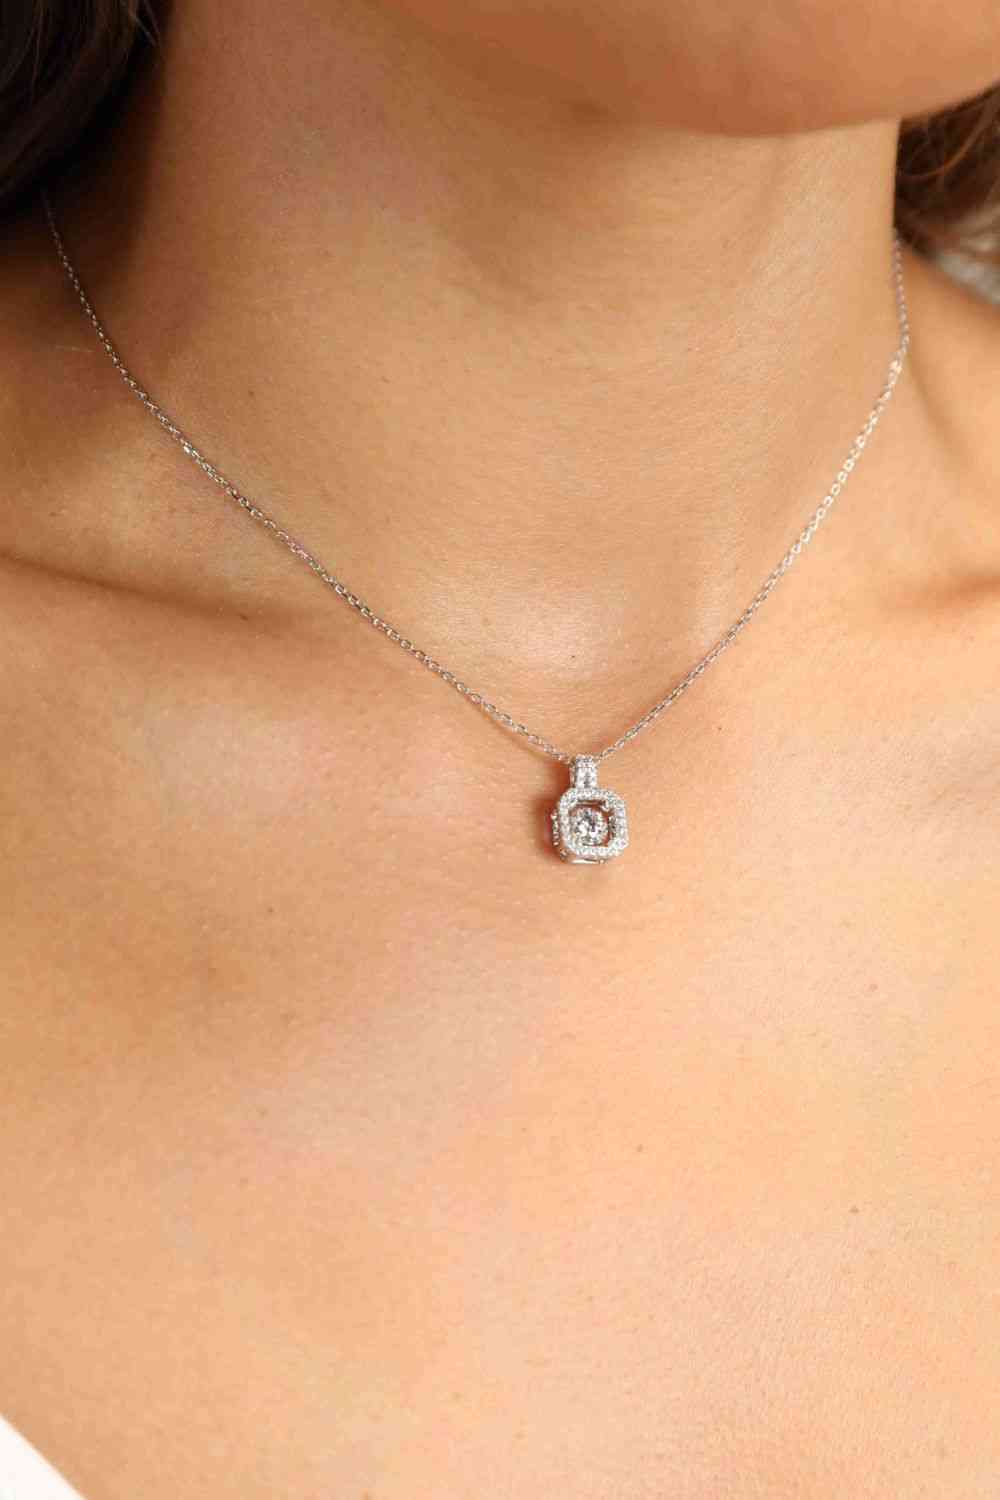 Adored Moissanite 925 Sterling Silver Necklace